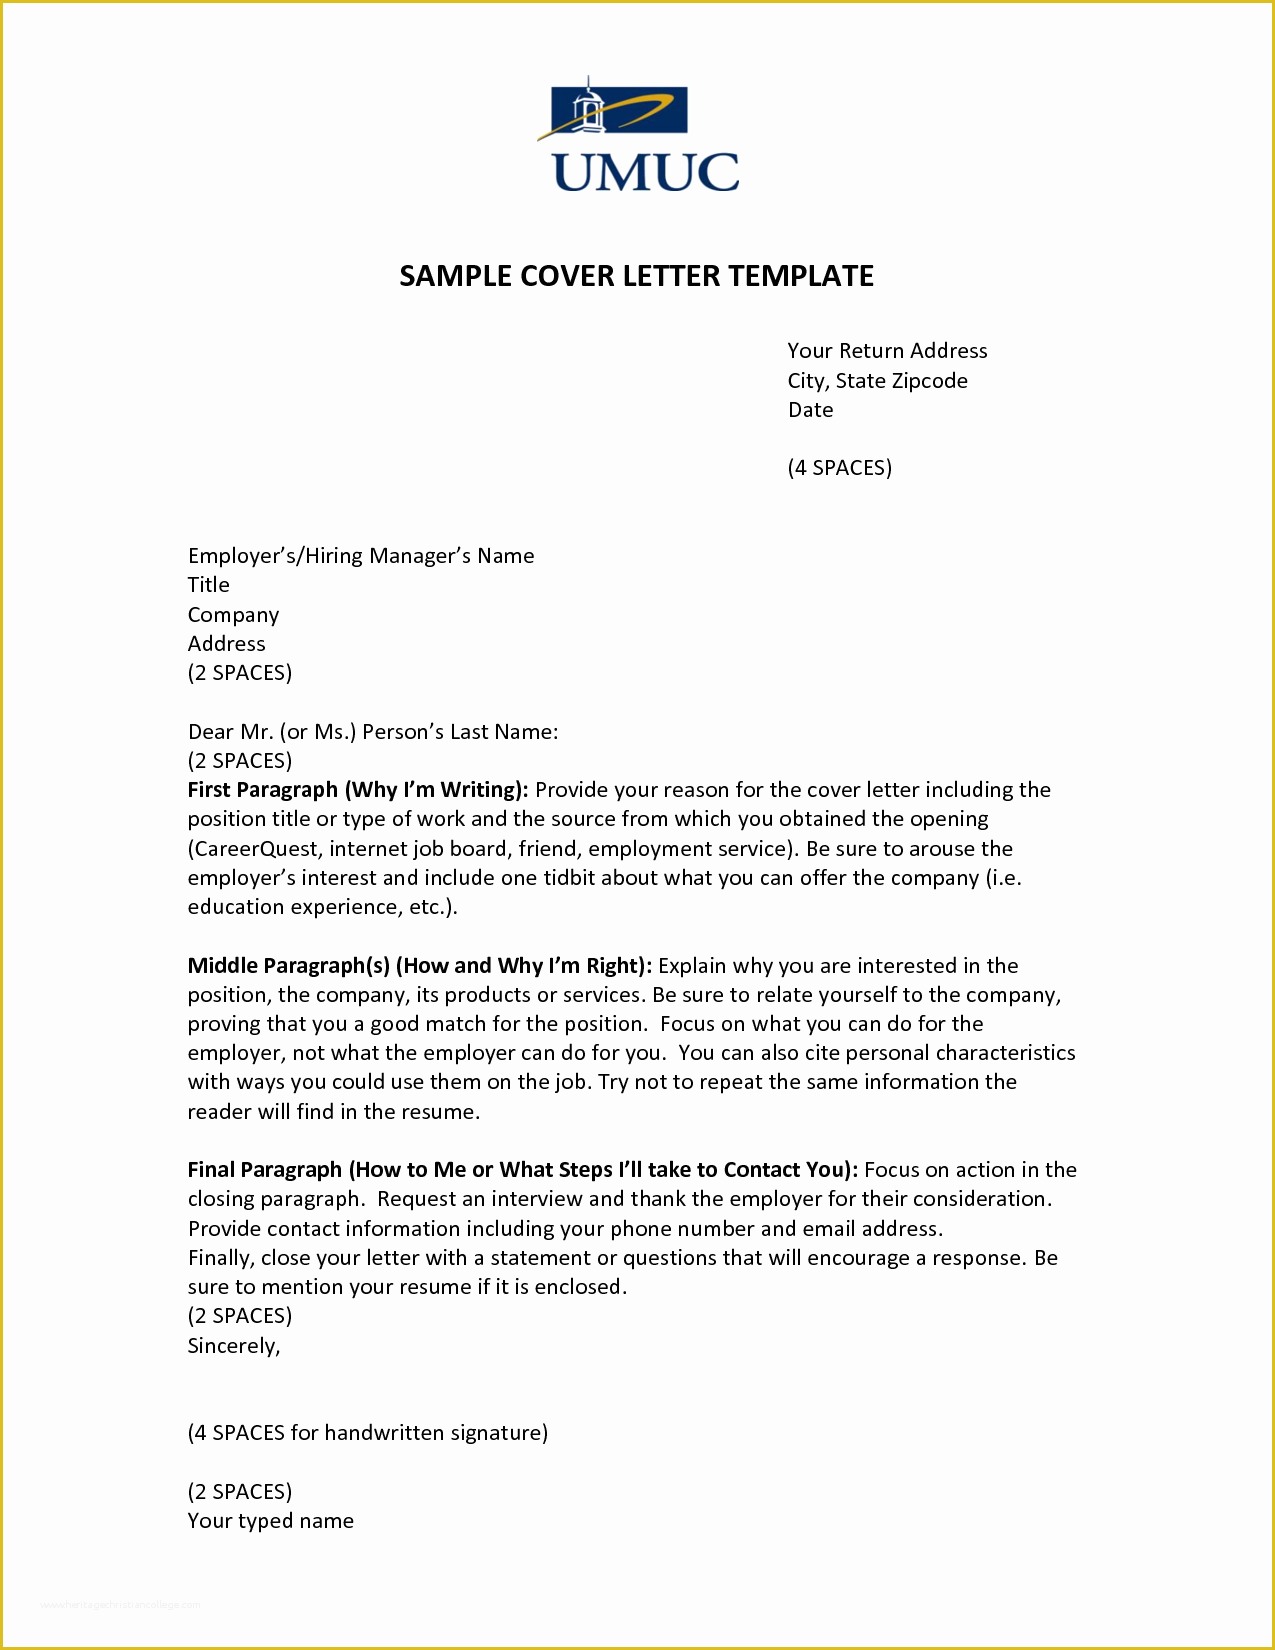 Free Resume Cover Letter Template Of Sample Cover Letter Template Umucover Letter Template